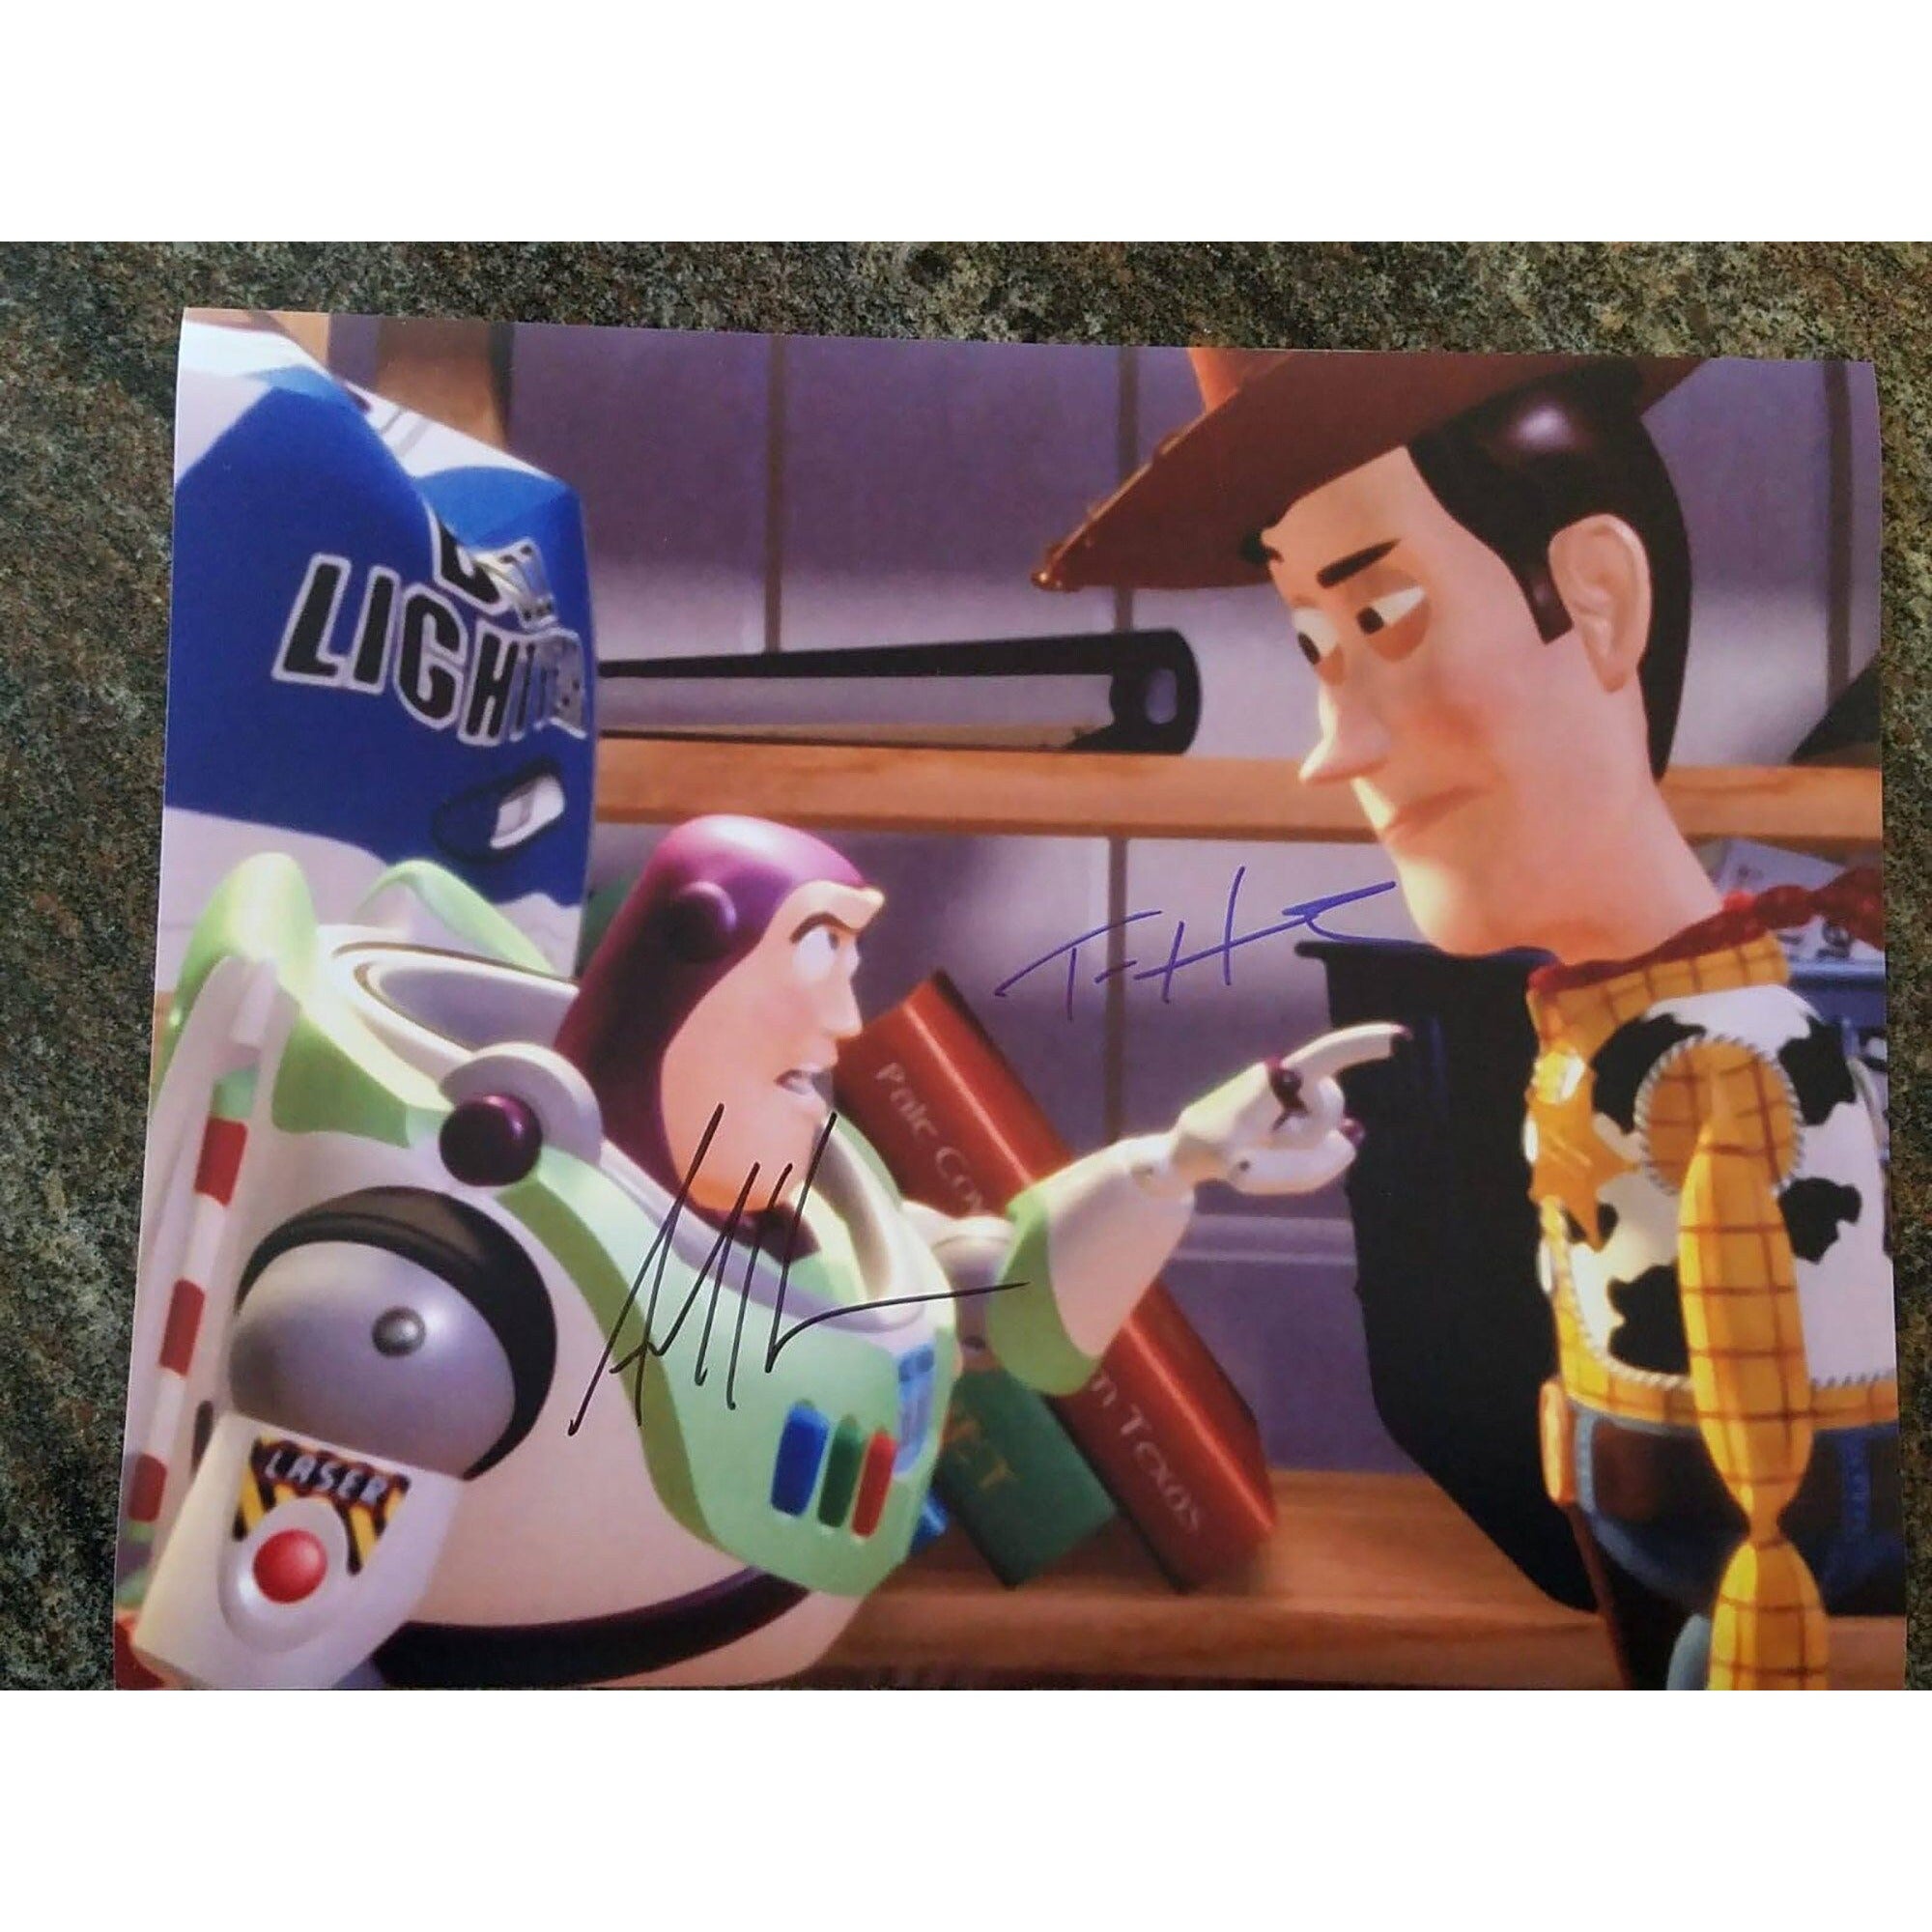 Toy Story, Tom Hanks, Tim Allen signed with proof 11 by 14